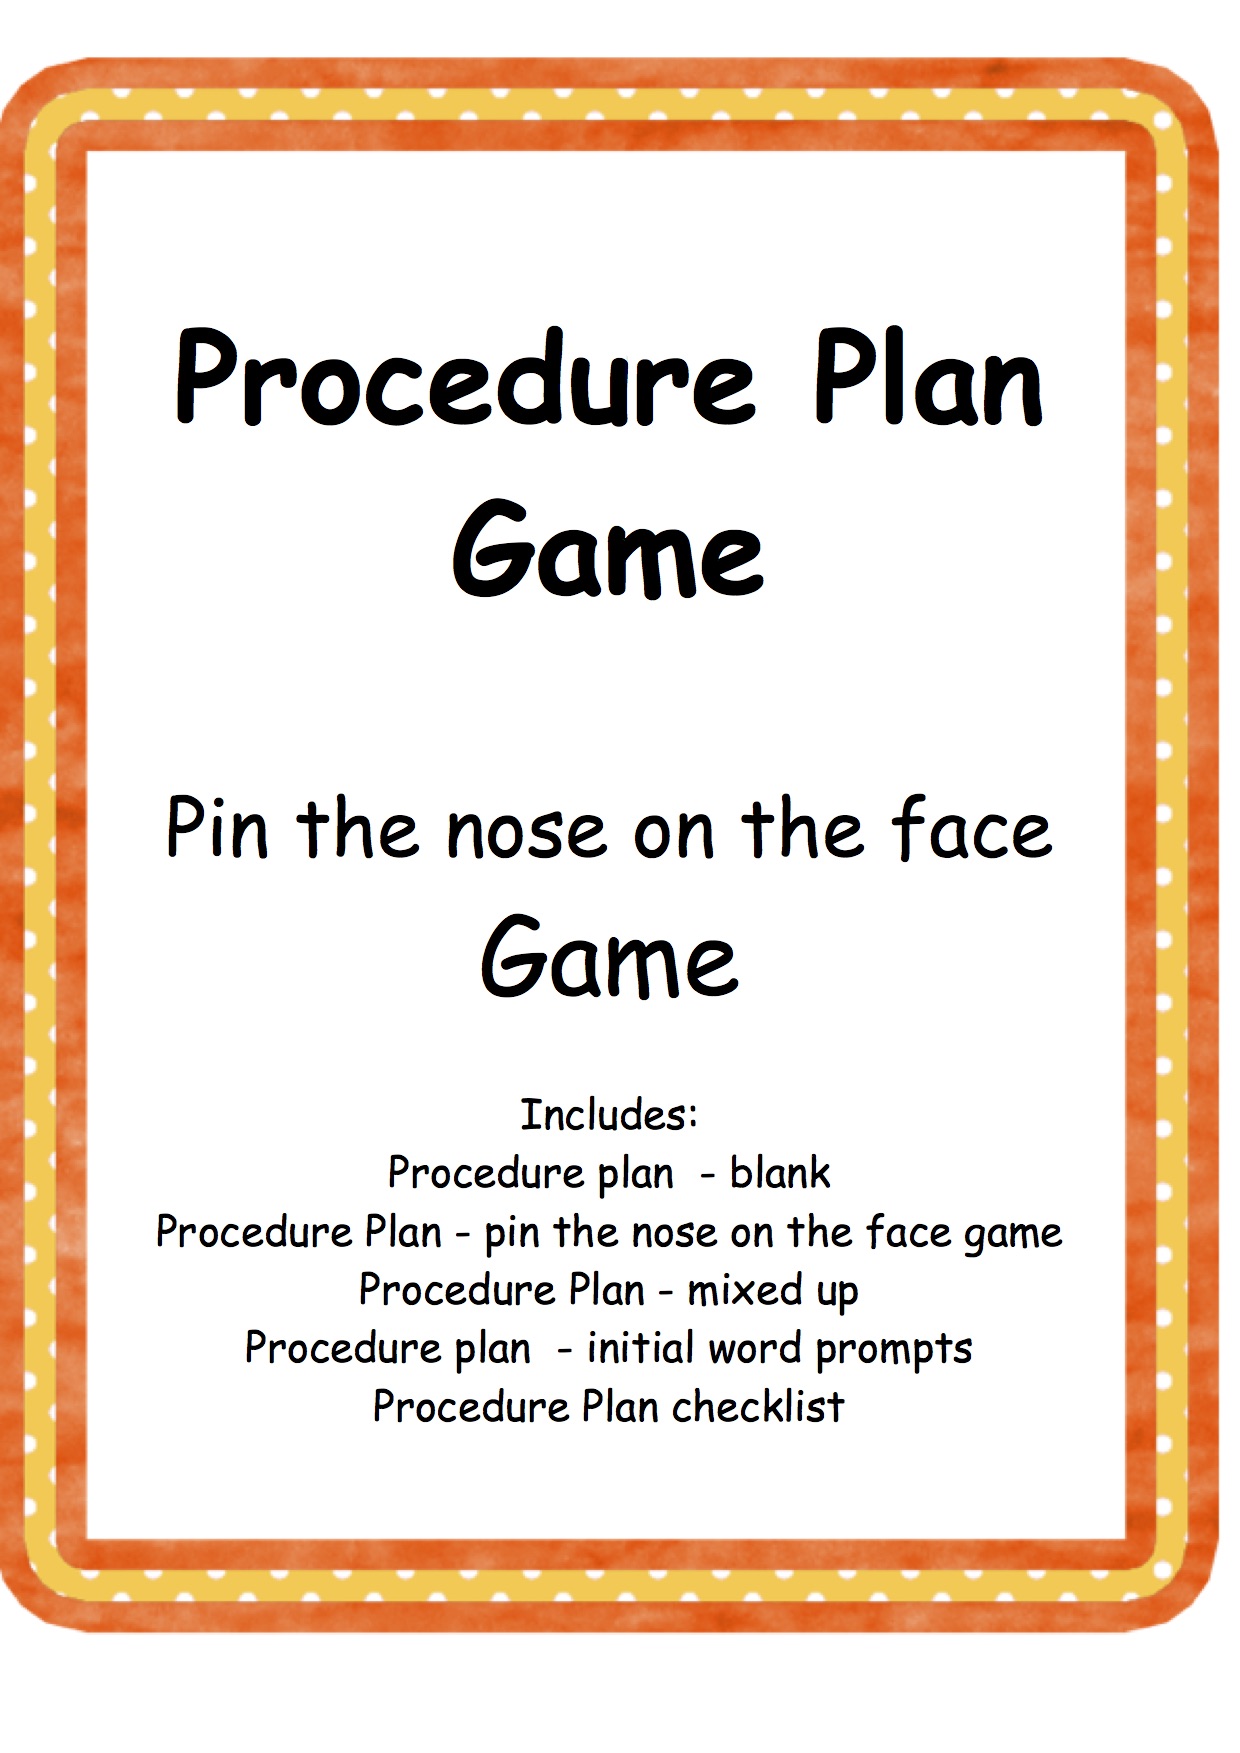 Procedure Plan -Game - Pin the nose on the face